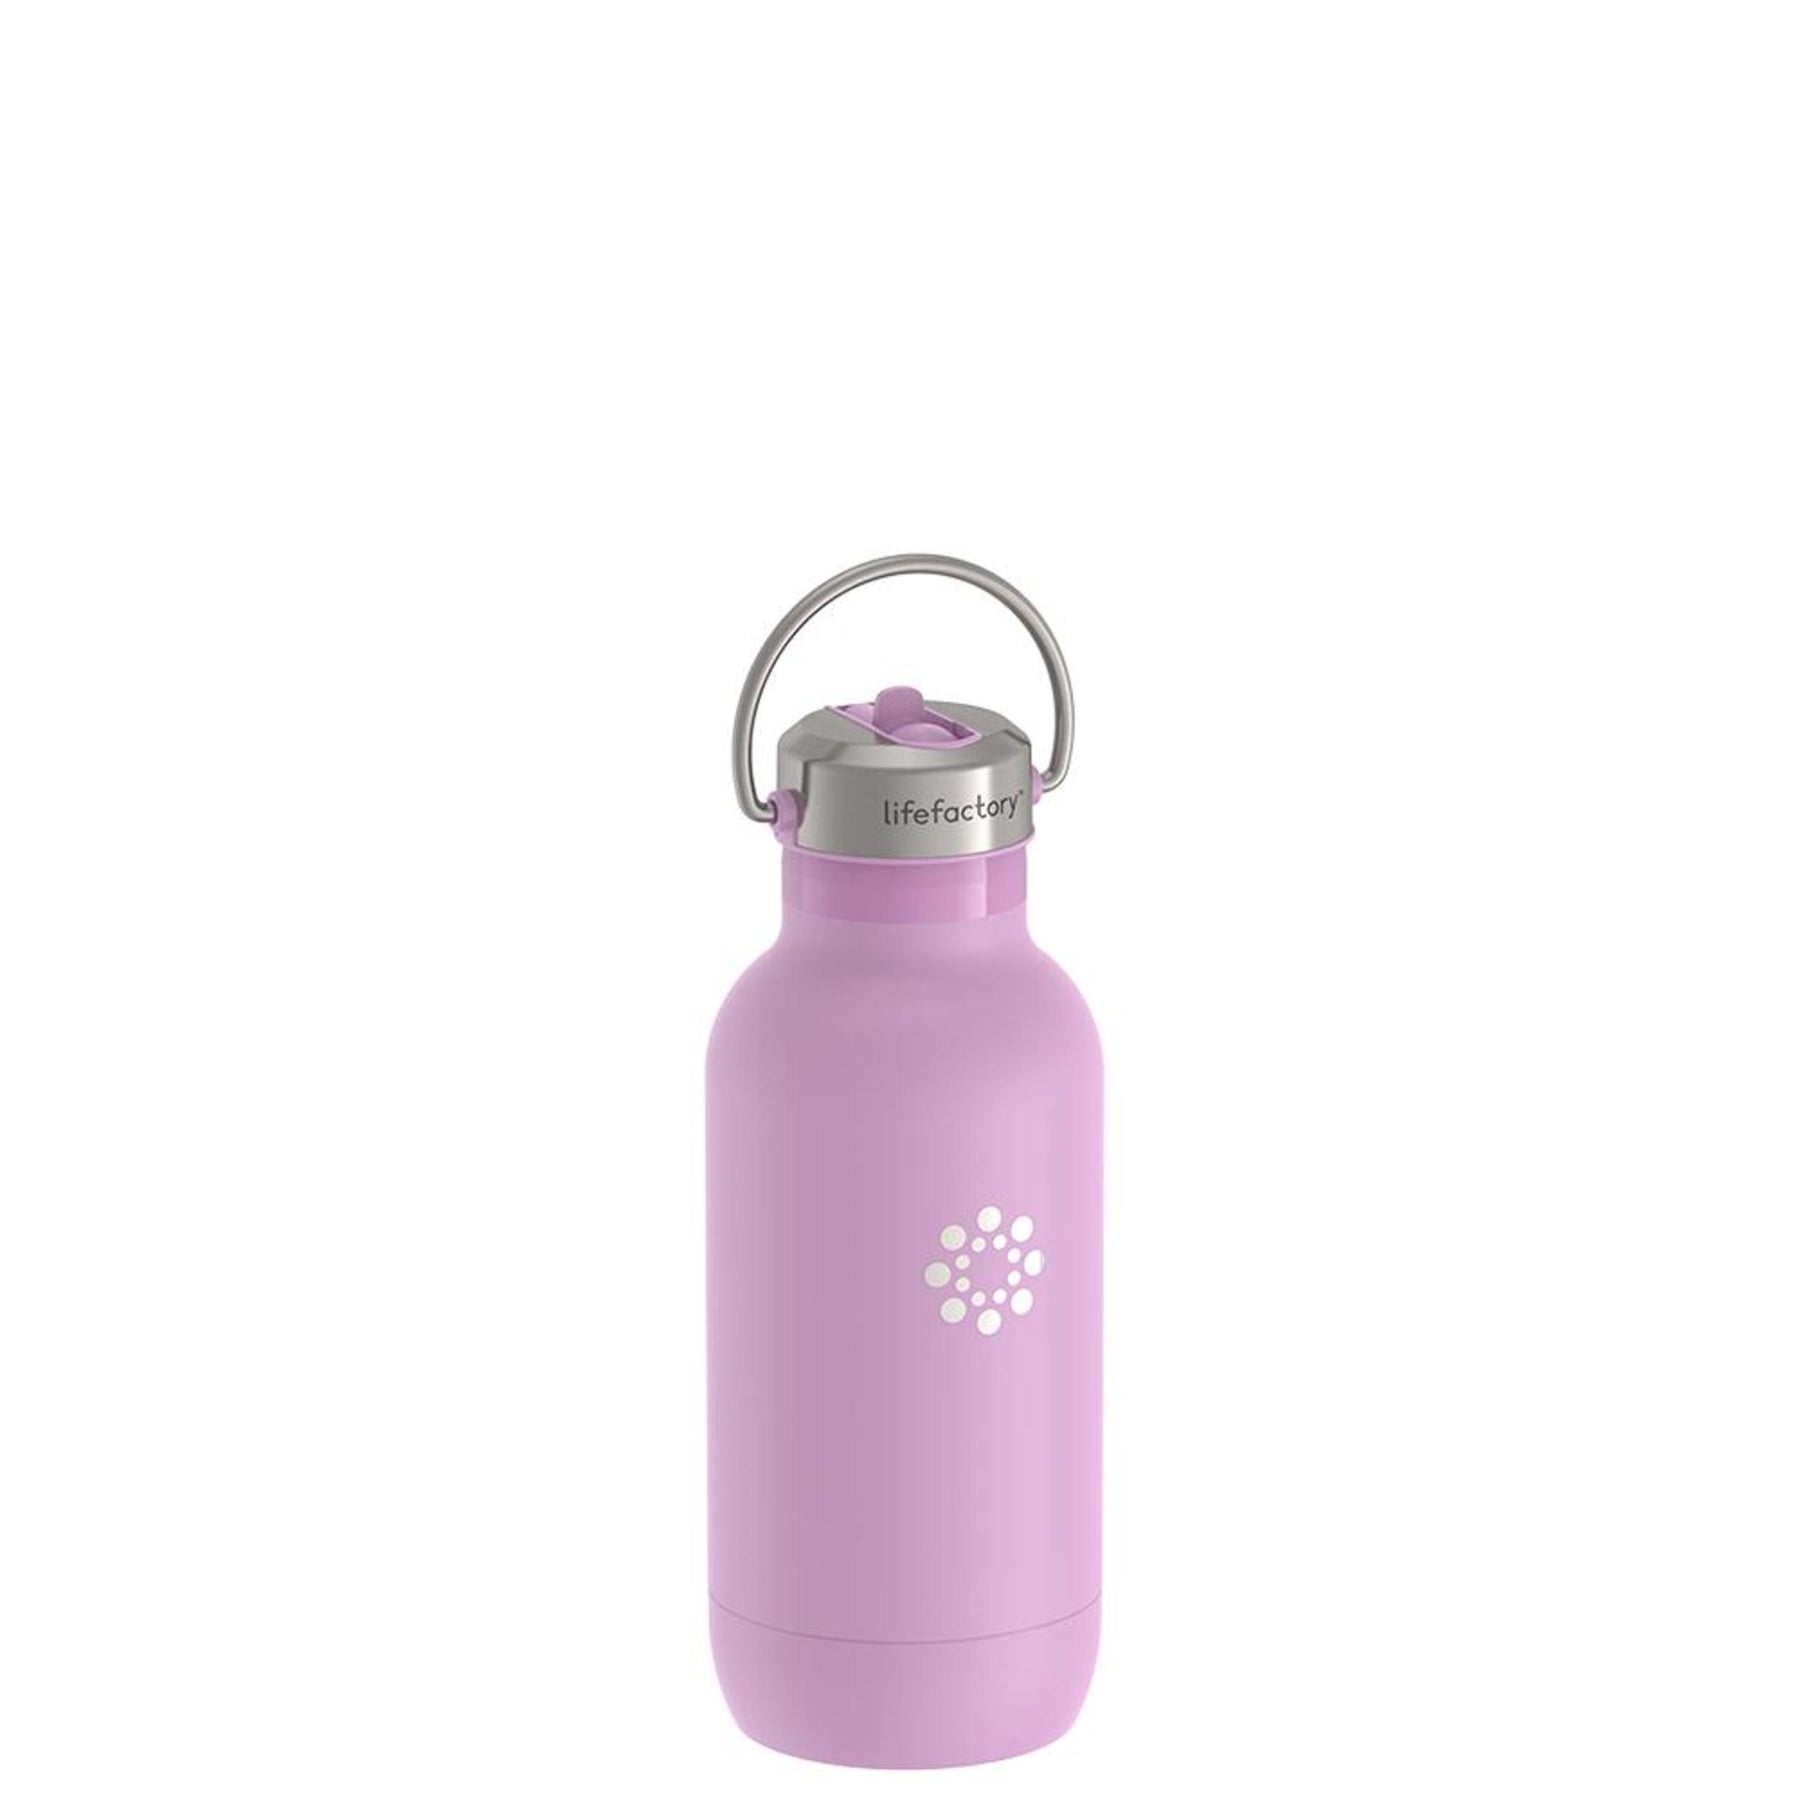 Thermos Baby 7 oz. Vacuum Insulated Stainless Steel Sippy Cup w/ Handles - Rose